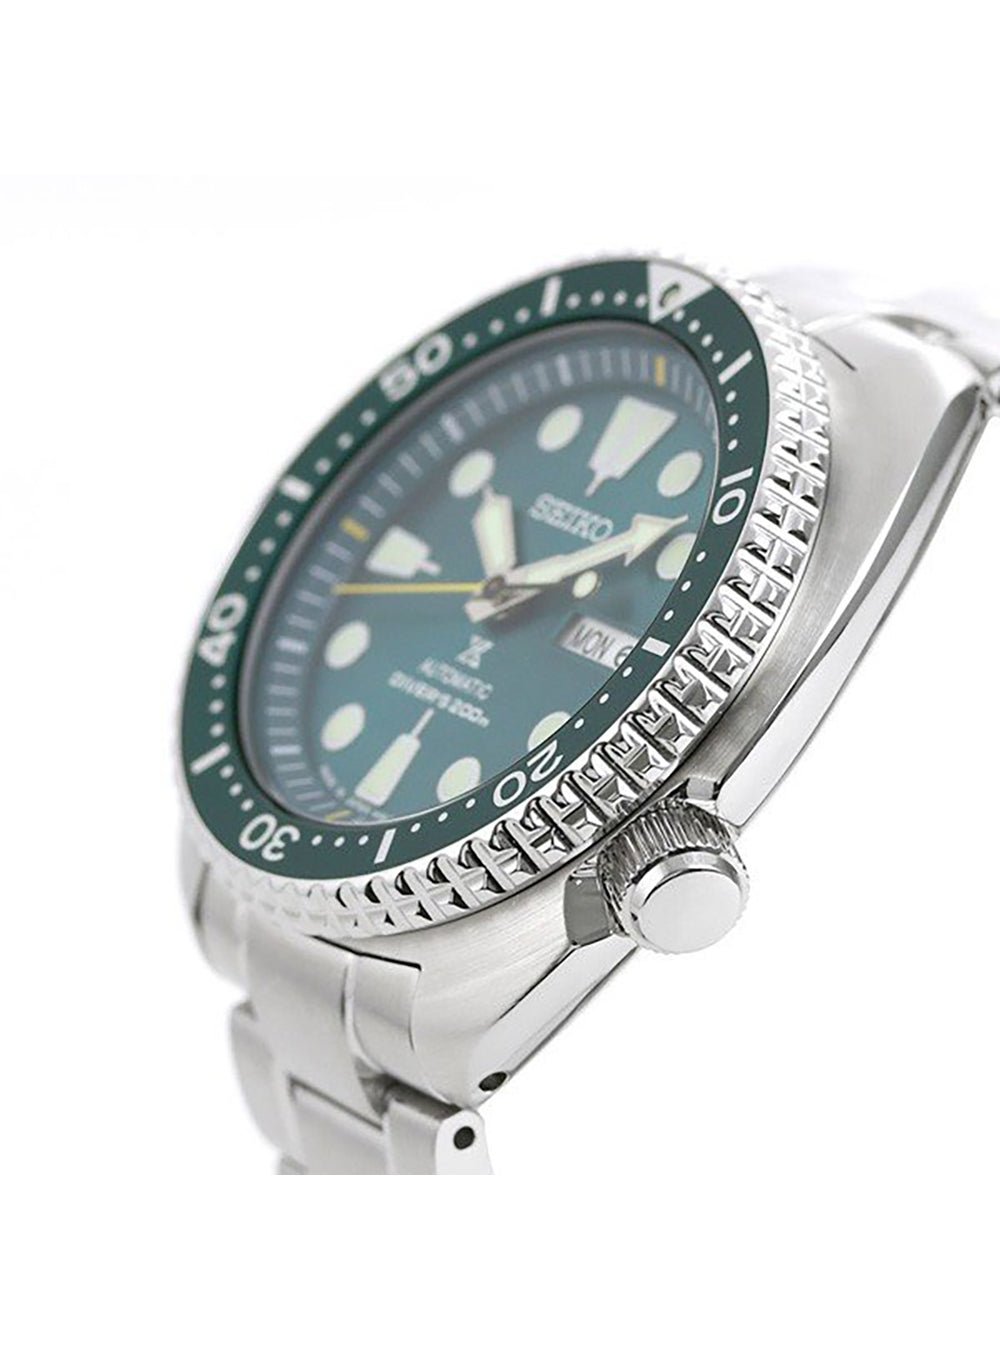 SEIKO PROSPEX TURTLE SBDY039 ONLINE LIMITED MODEL MADE IN JAPAN JDMWRISTWATCHjapan-select